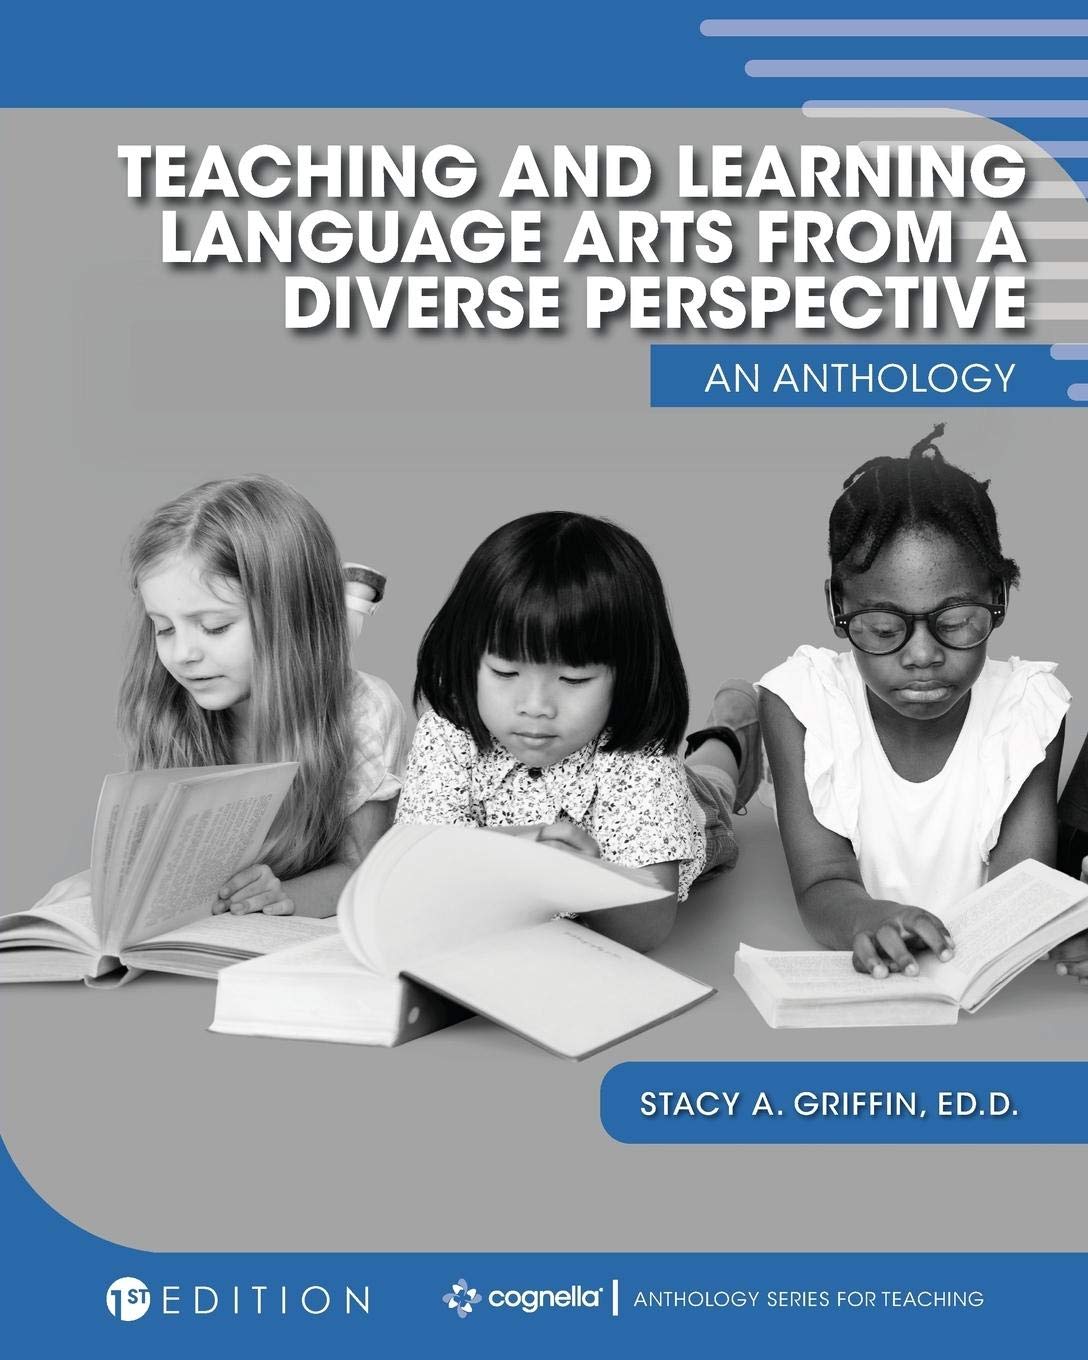 Teaching and Learning Language Arts from a Diverse Perspective: An Anthology